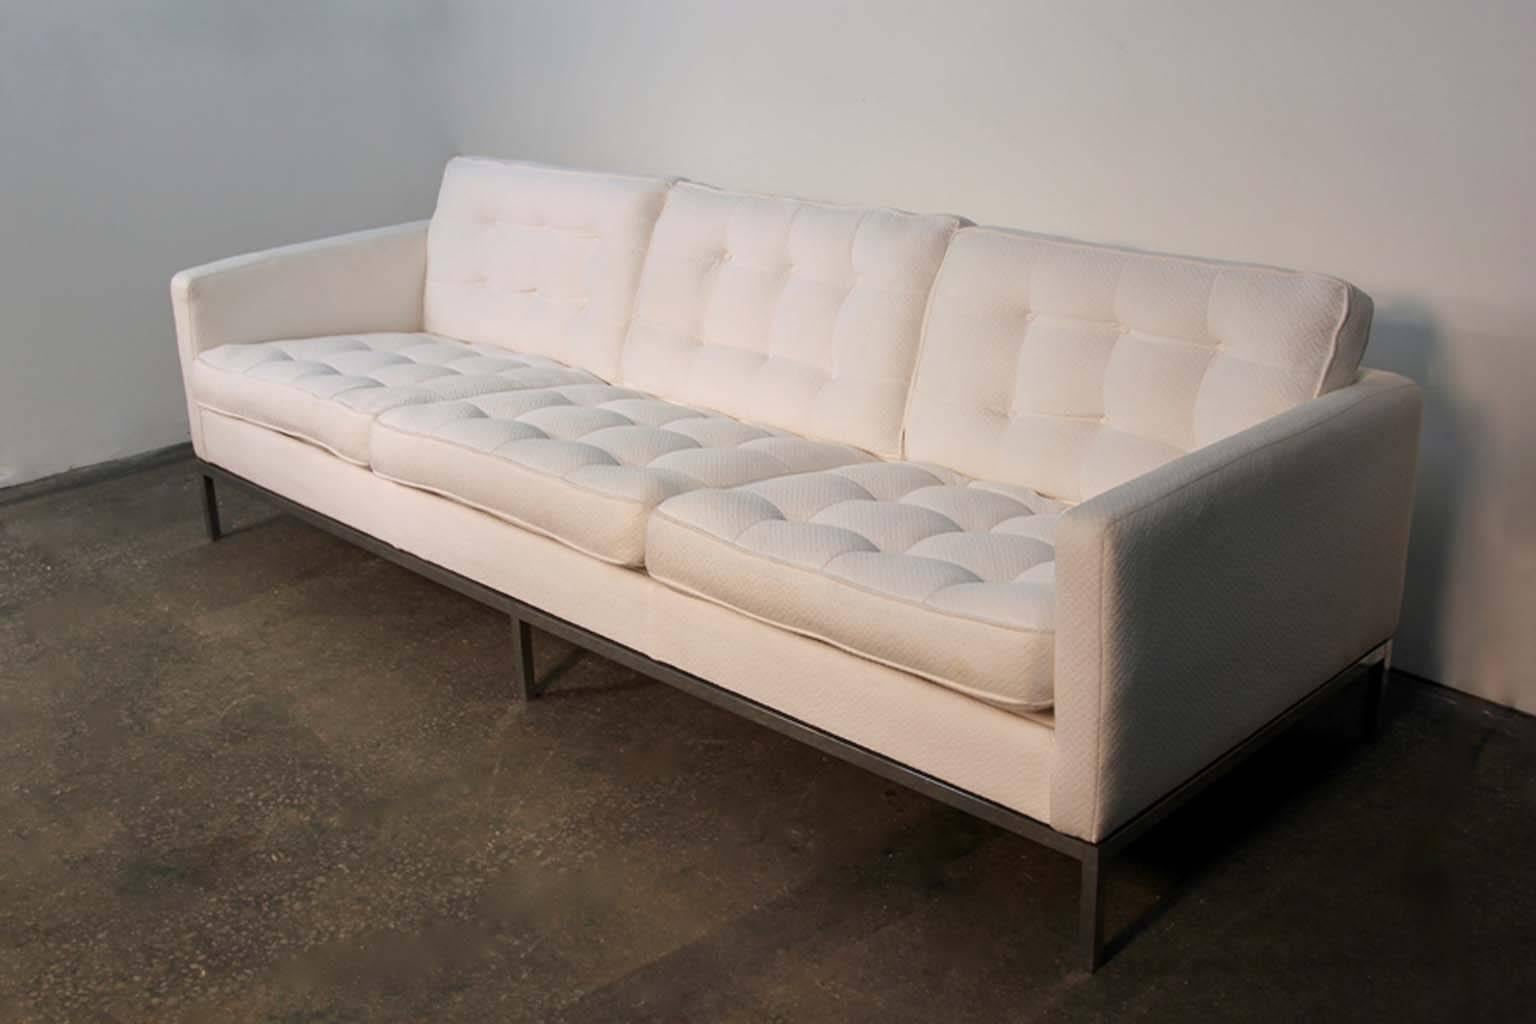 Florence Knoll designed three-seat sofa. White upholstery, with box stitching. Sits on chrome legs. In good condition, nice example of Mid-Century Modern design by Florence Knoll for Knoll Company.